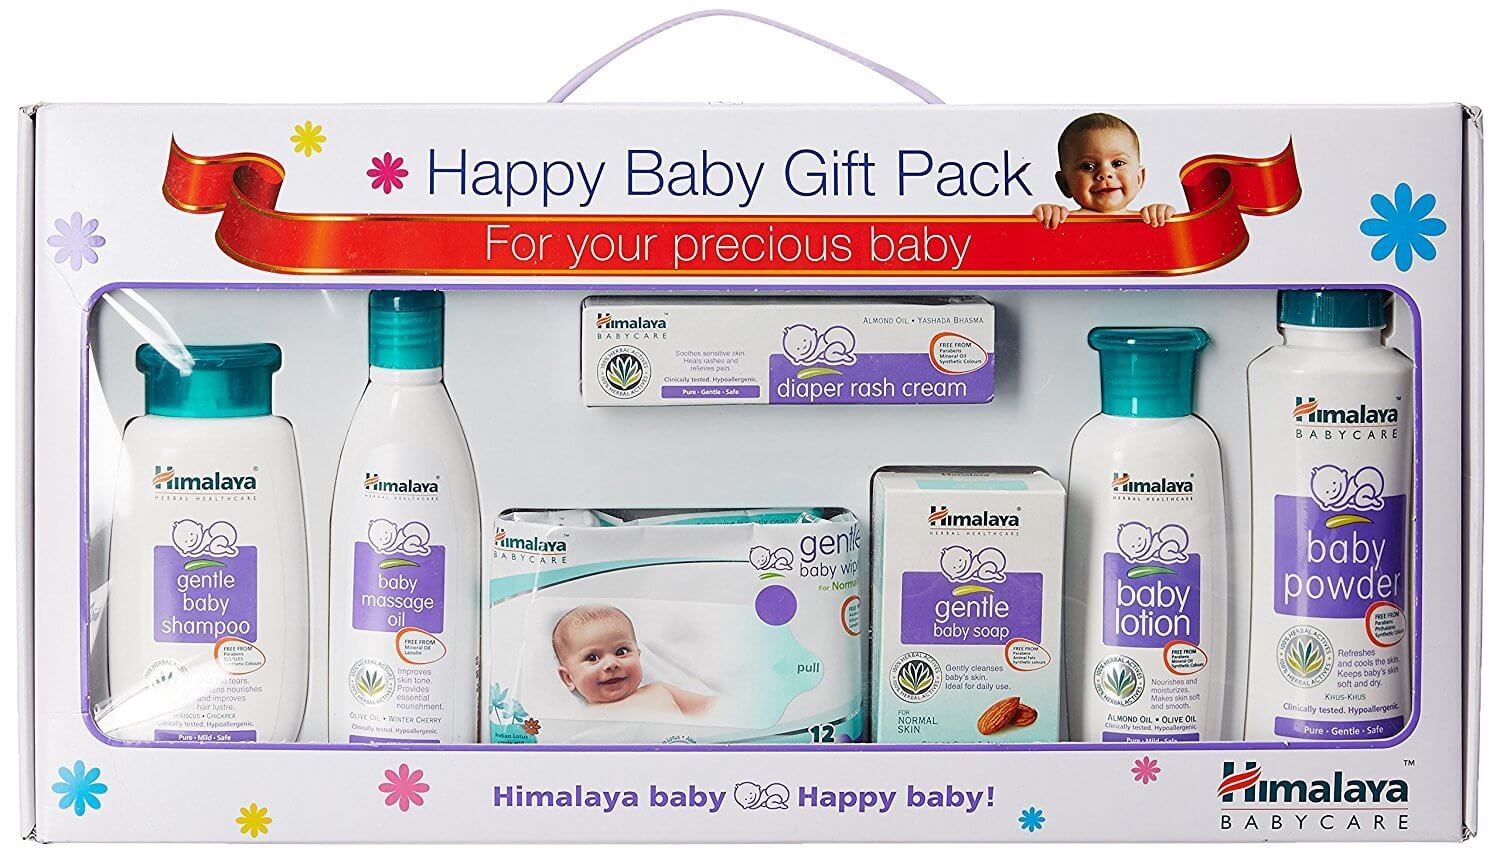 Himalaya Happy Baby Gift Pack, 7 Gift Items Price, Uses, Side Effects,  Composition - Apollo Pharmacy